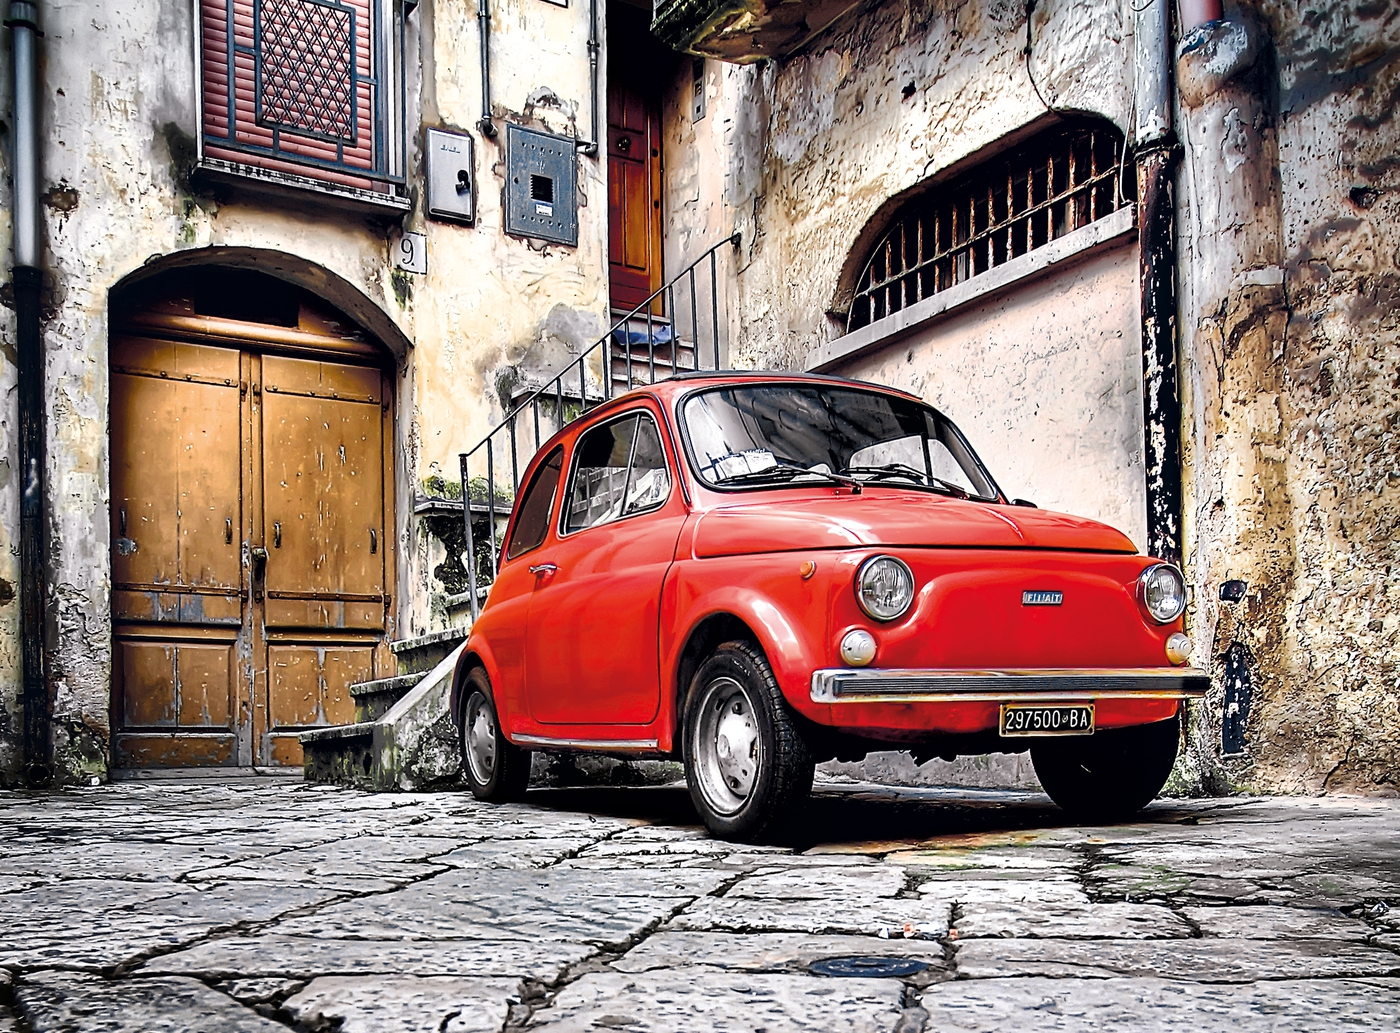 Clementoni 30575 Fiat 500-500 Teile Puzzle High Quality Collection 